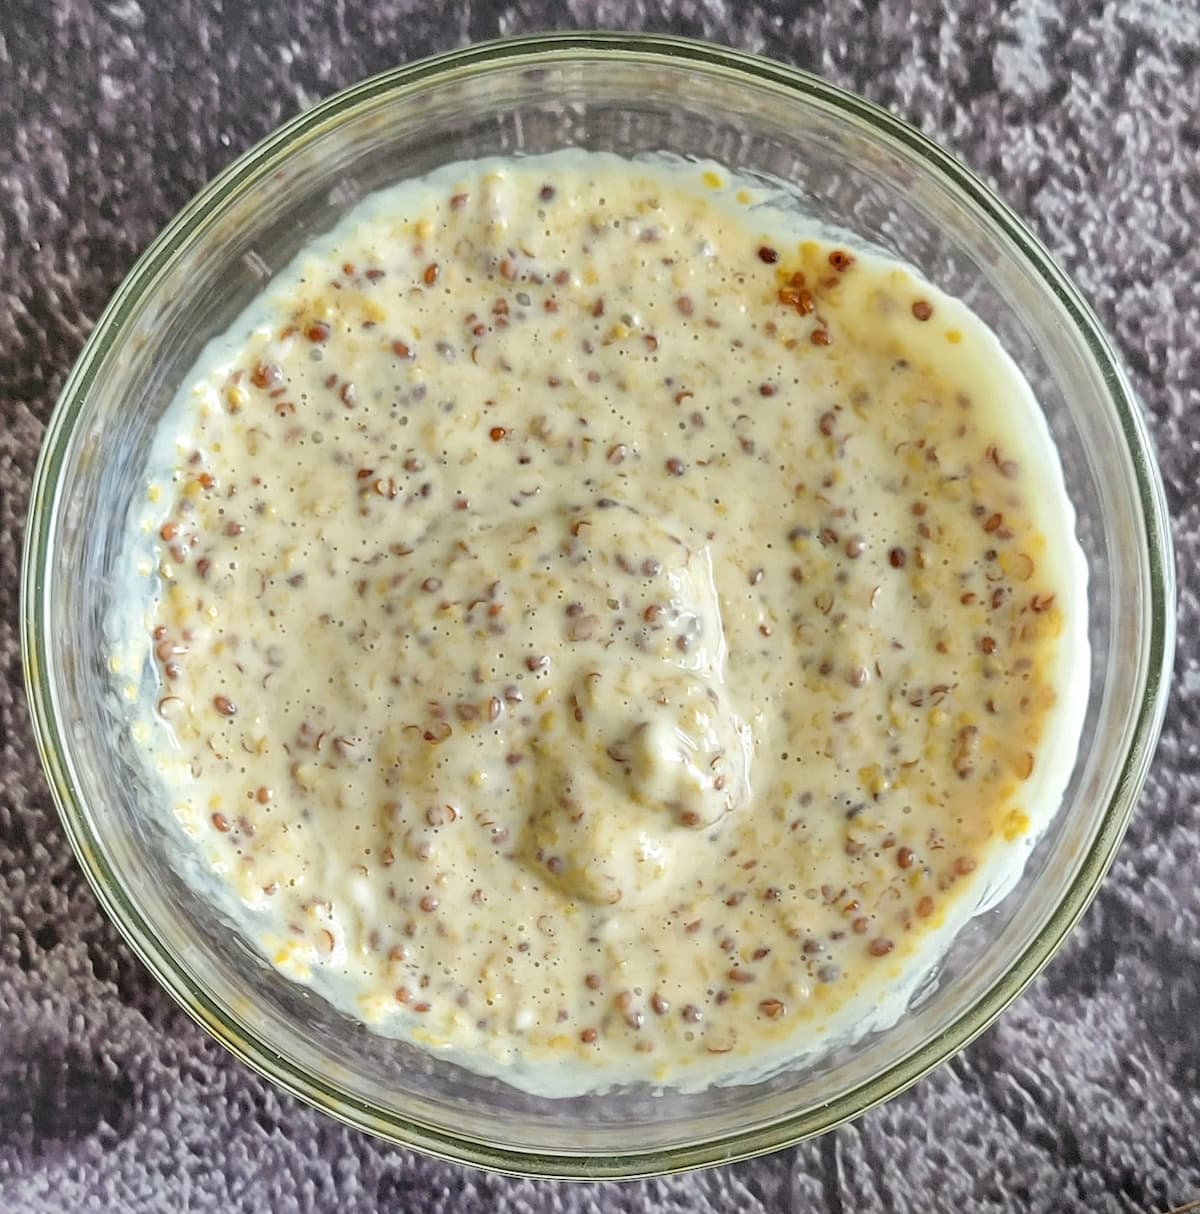 mayo and whole grain mustard mixed in a bowl